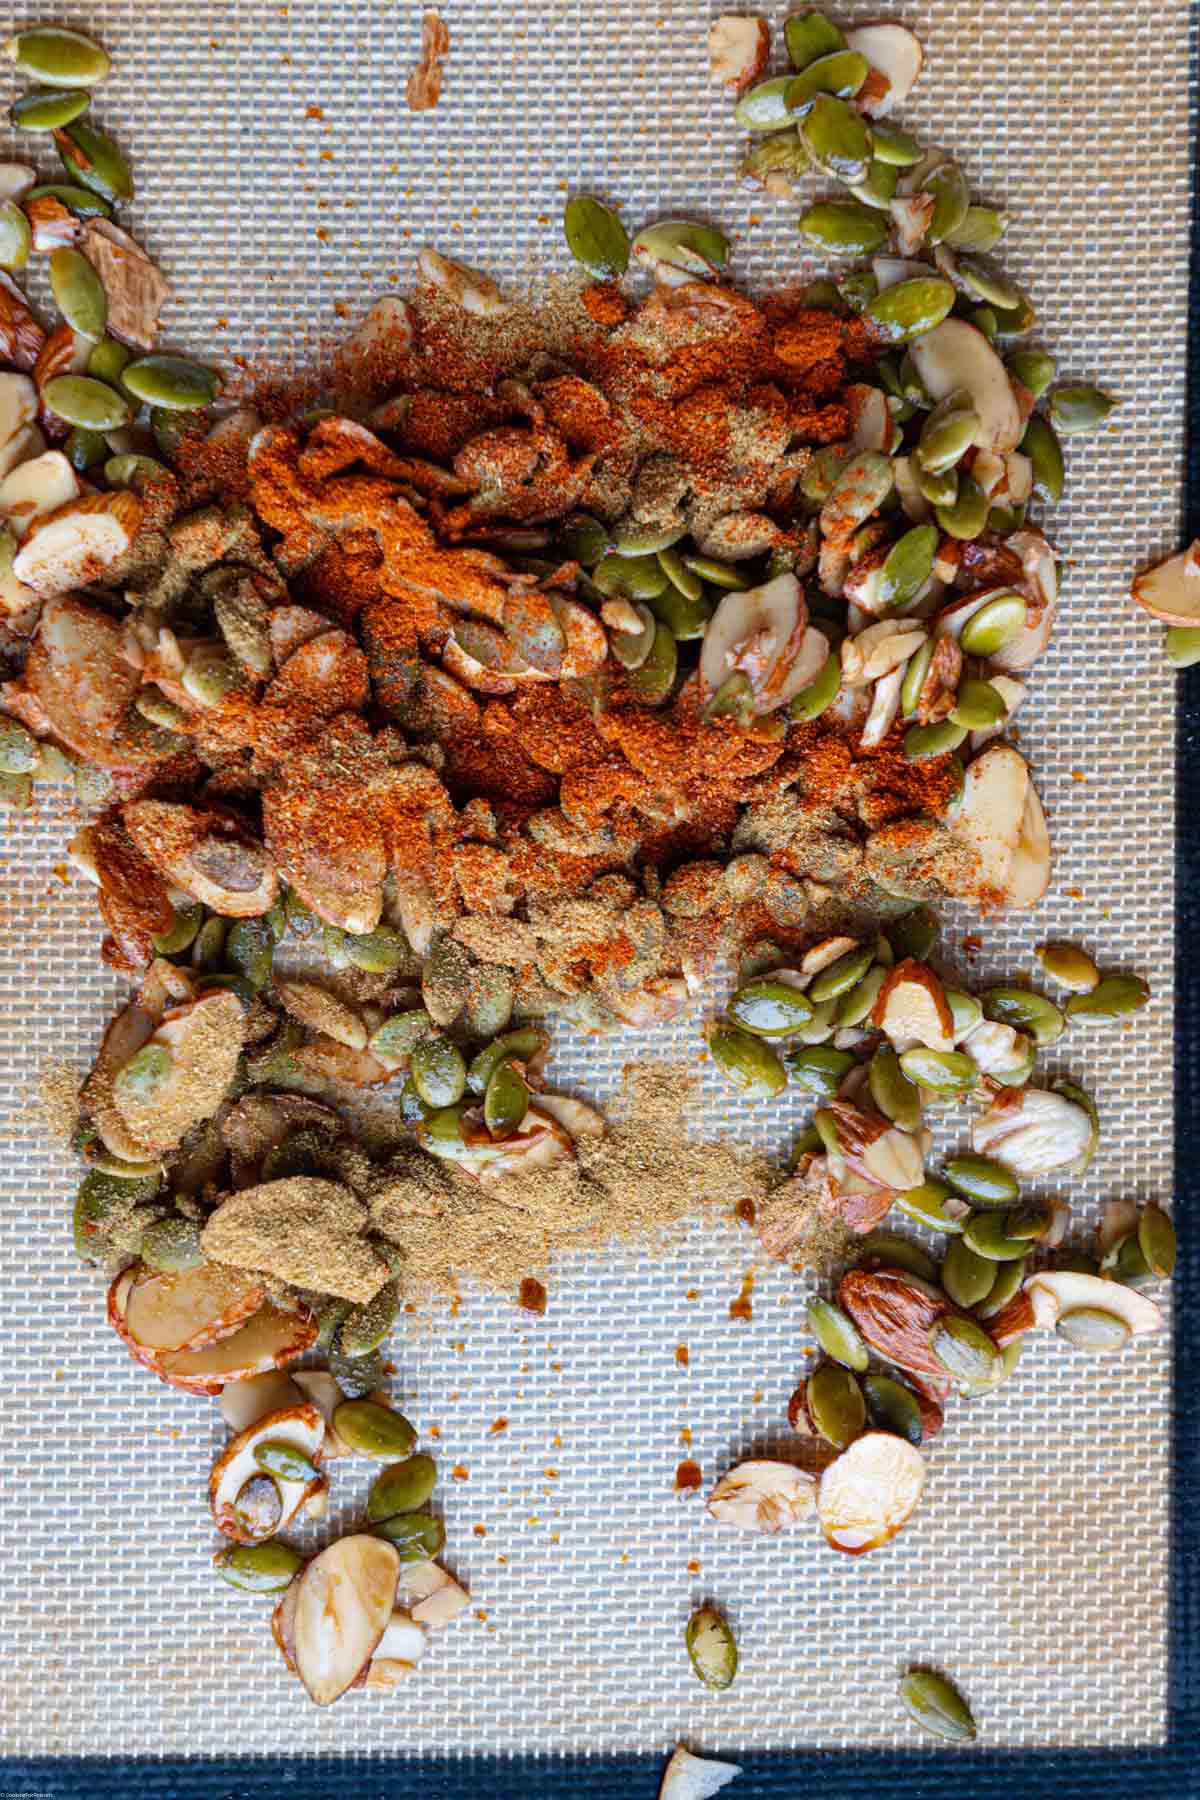 Slivered almonds and pepitas tossed with spices on a baking sheet.